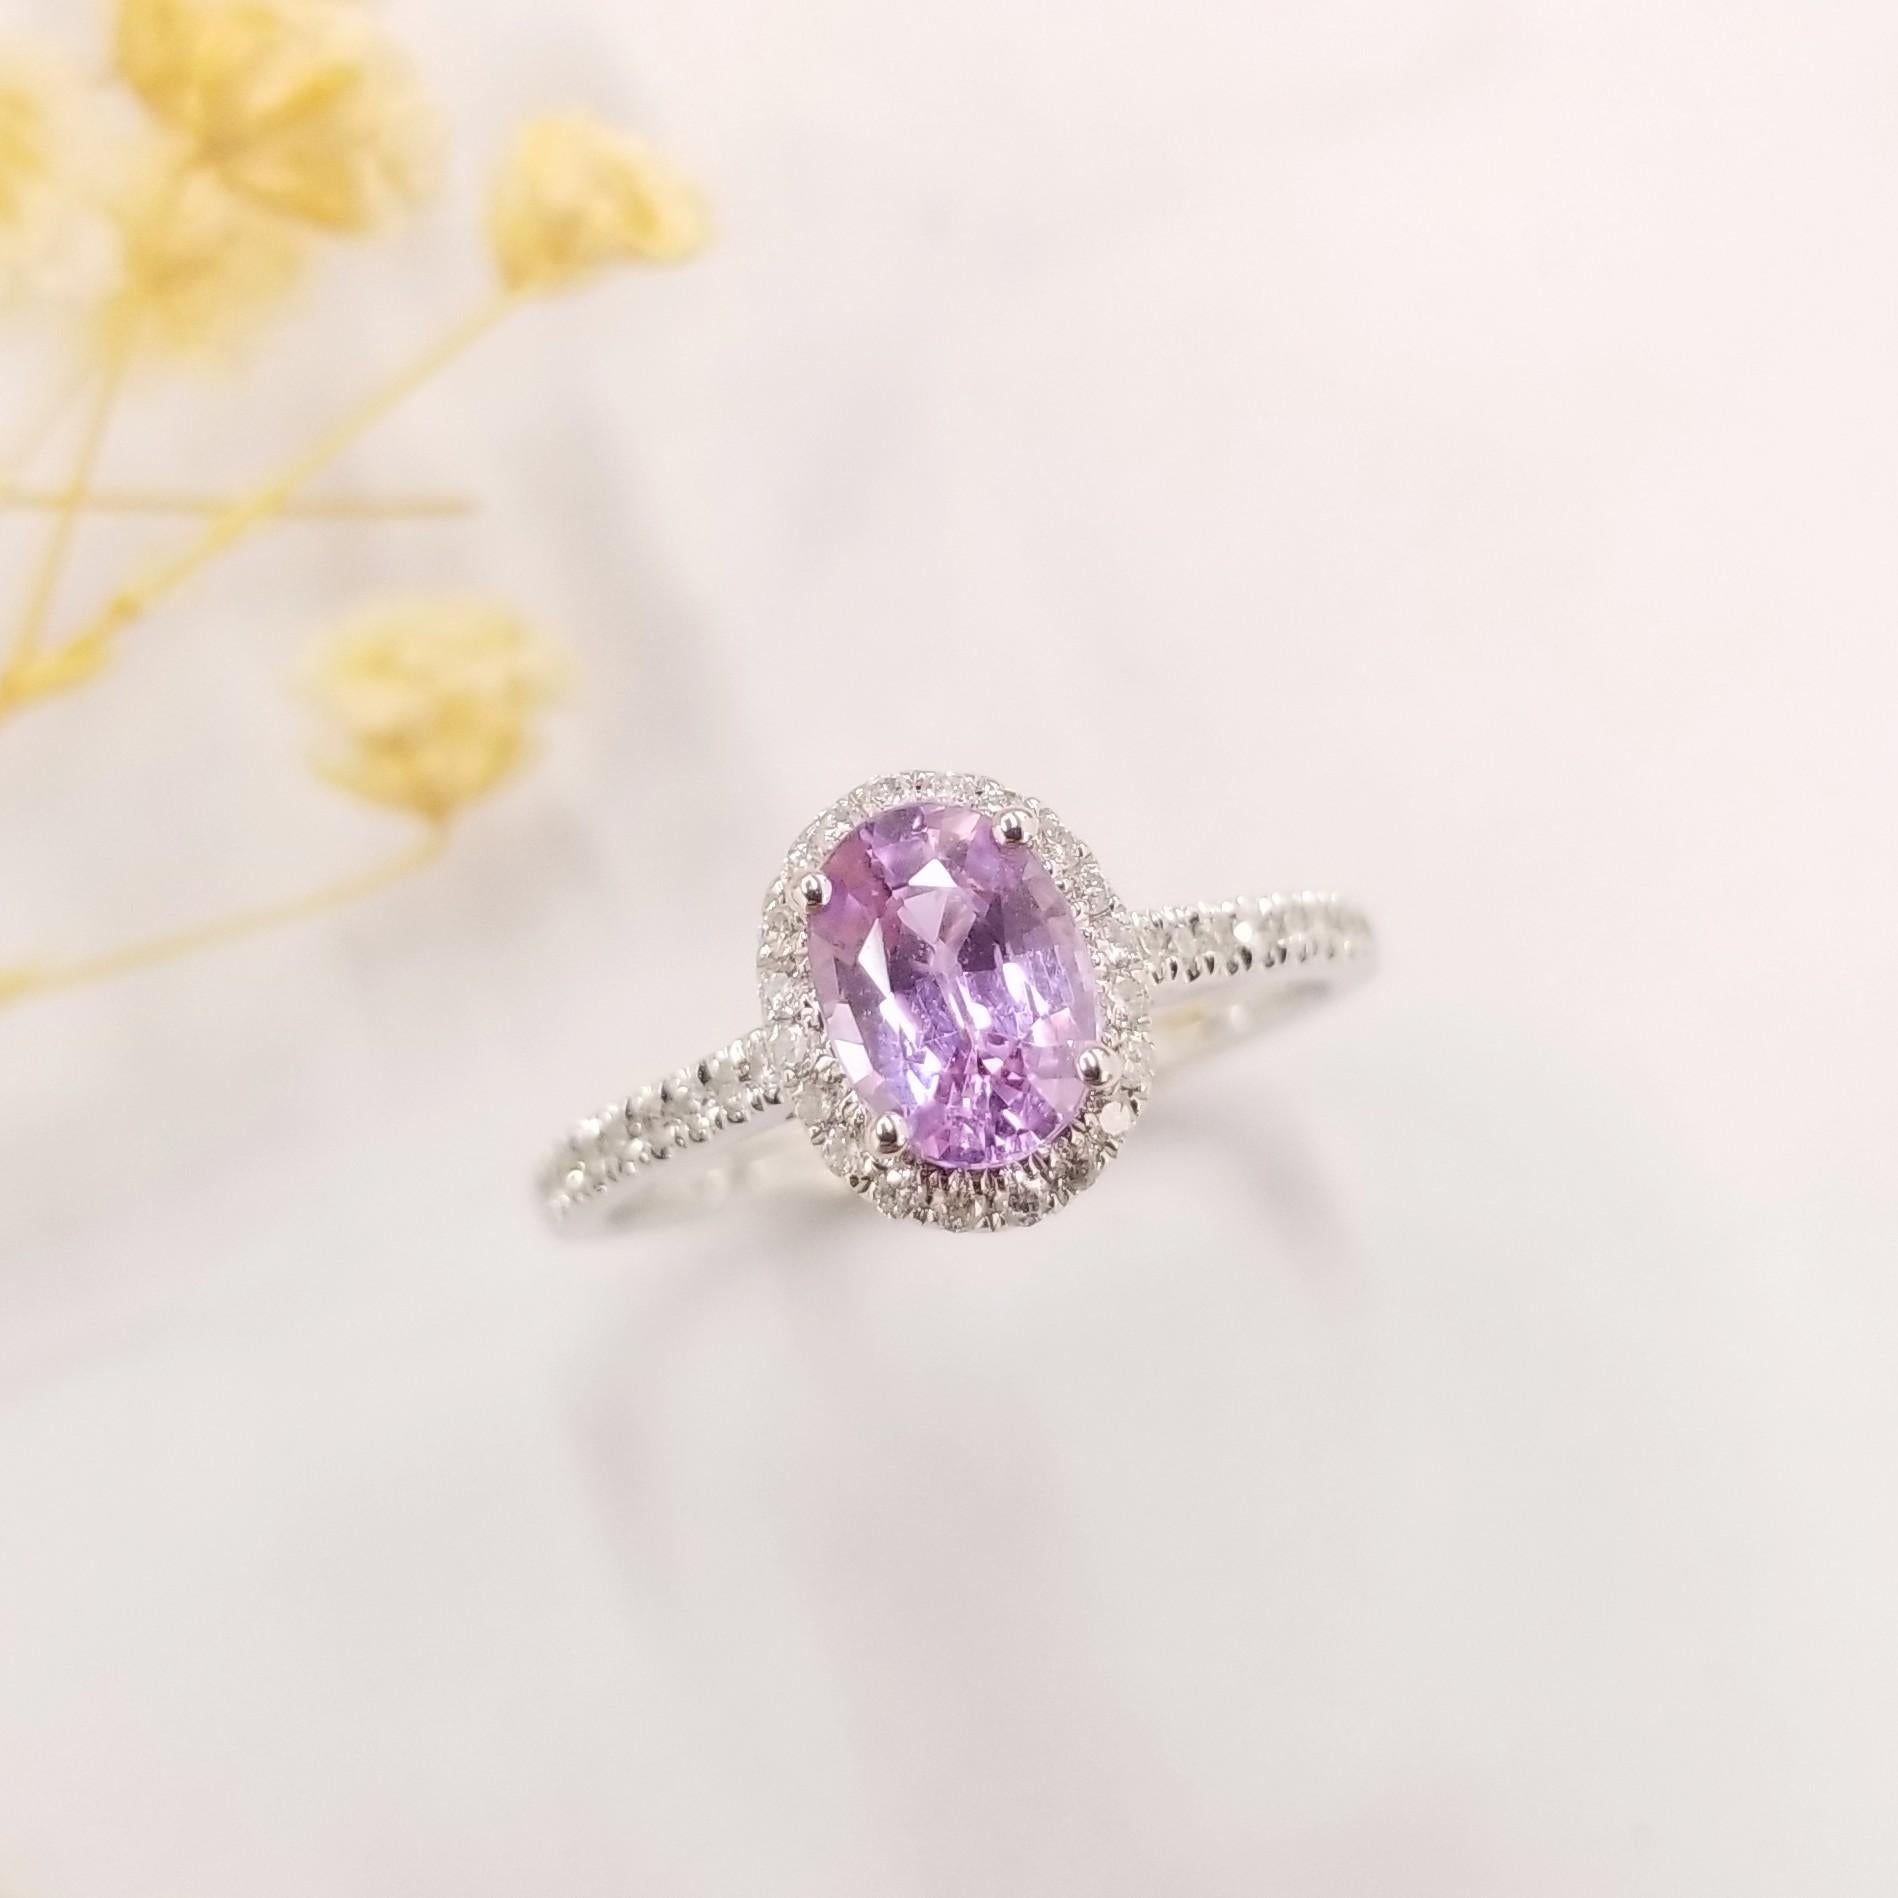 A beautiful cushion cut 1.04 carat Purple sapphire, set with a halo of diamonds. Handmade in 18K white gold with a total diamond weight of 0.21carats
